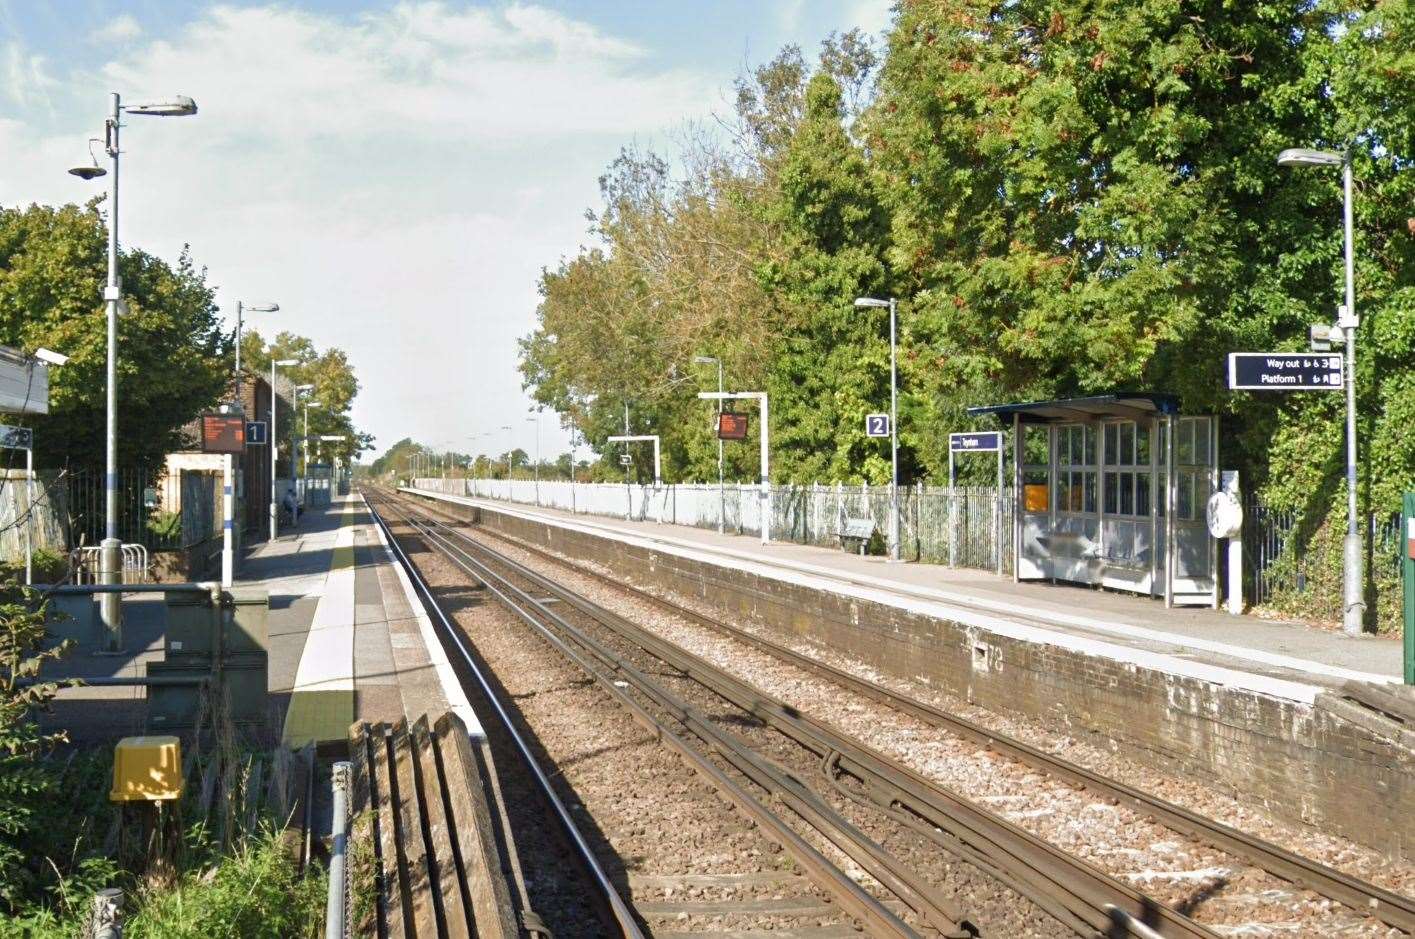 Criminal damage was reported at Teynham railway station earlier this month. Picture: Google